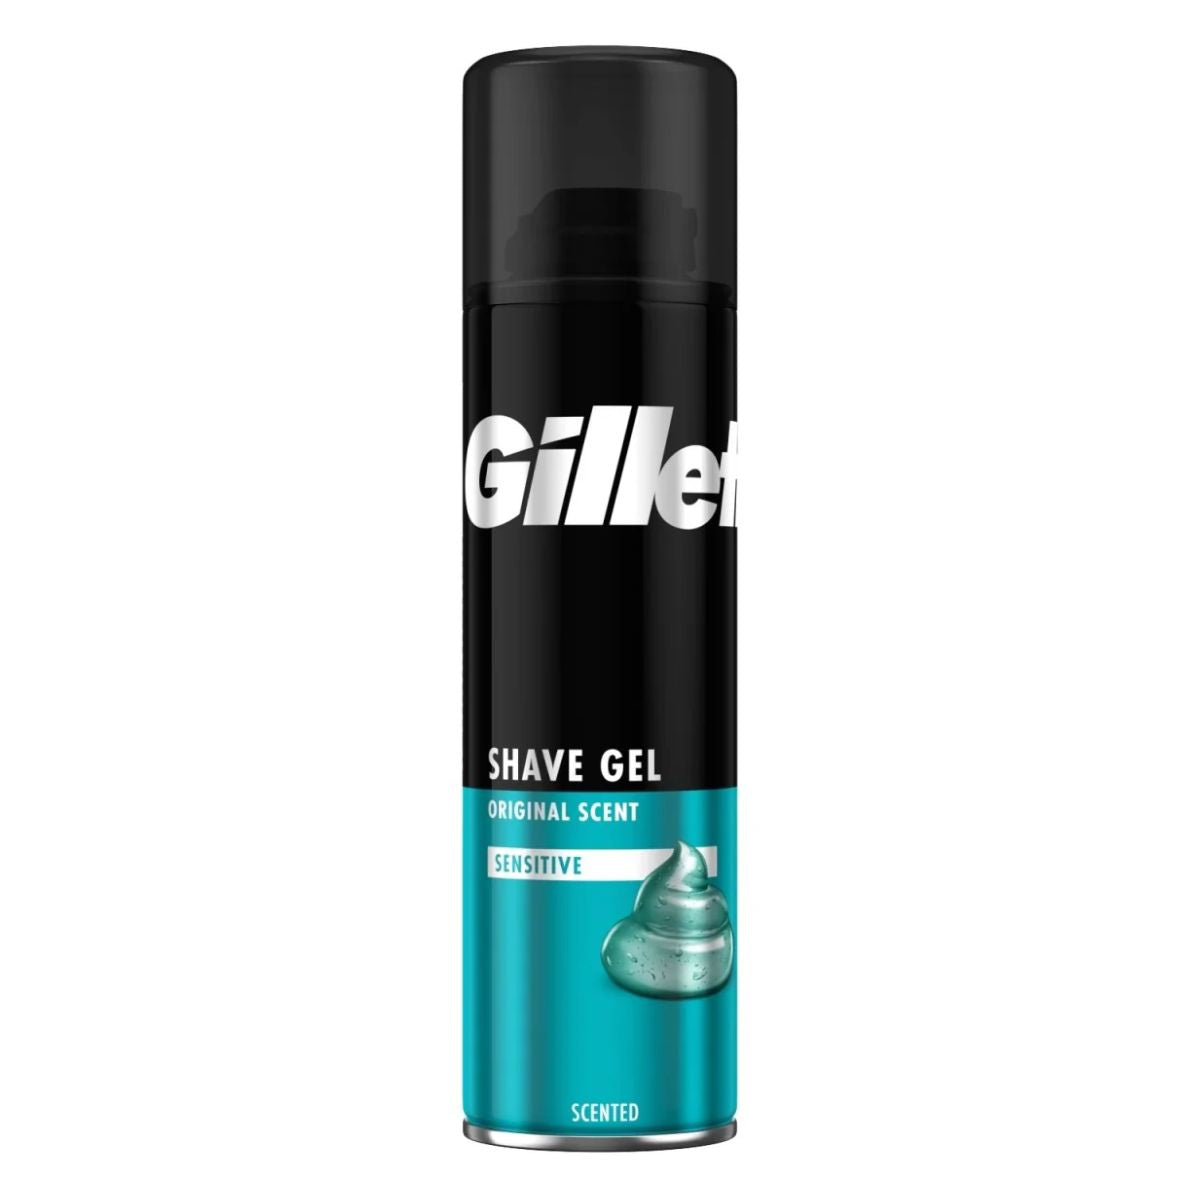 A can of Gillette - Classic Shave Gel - 200ml with original scent.